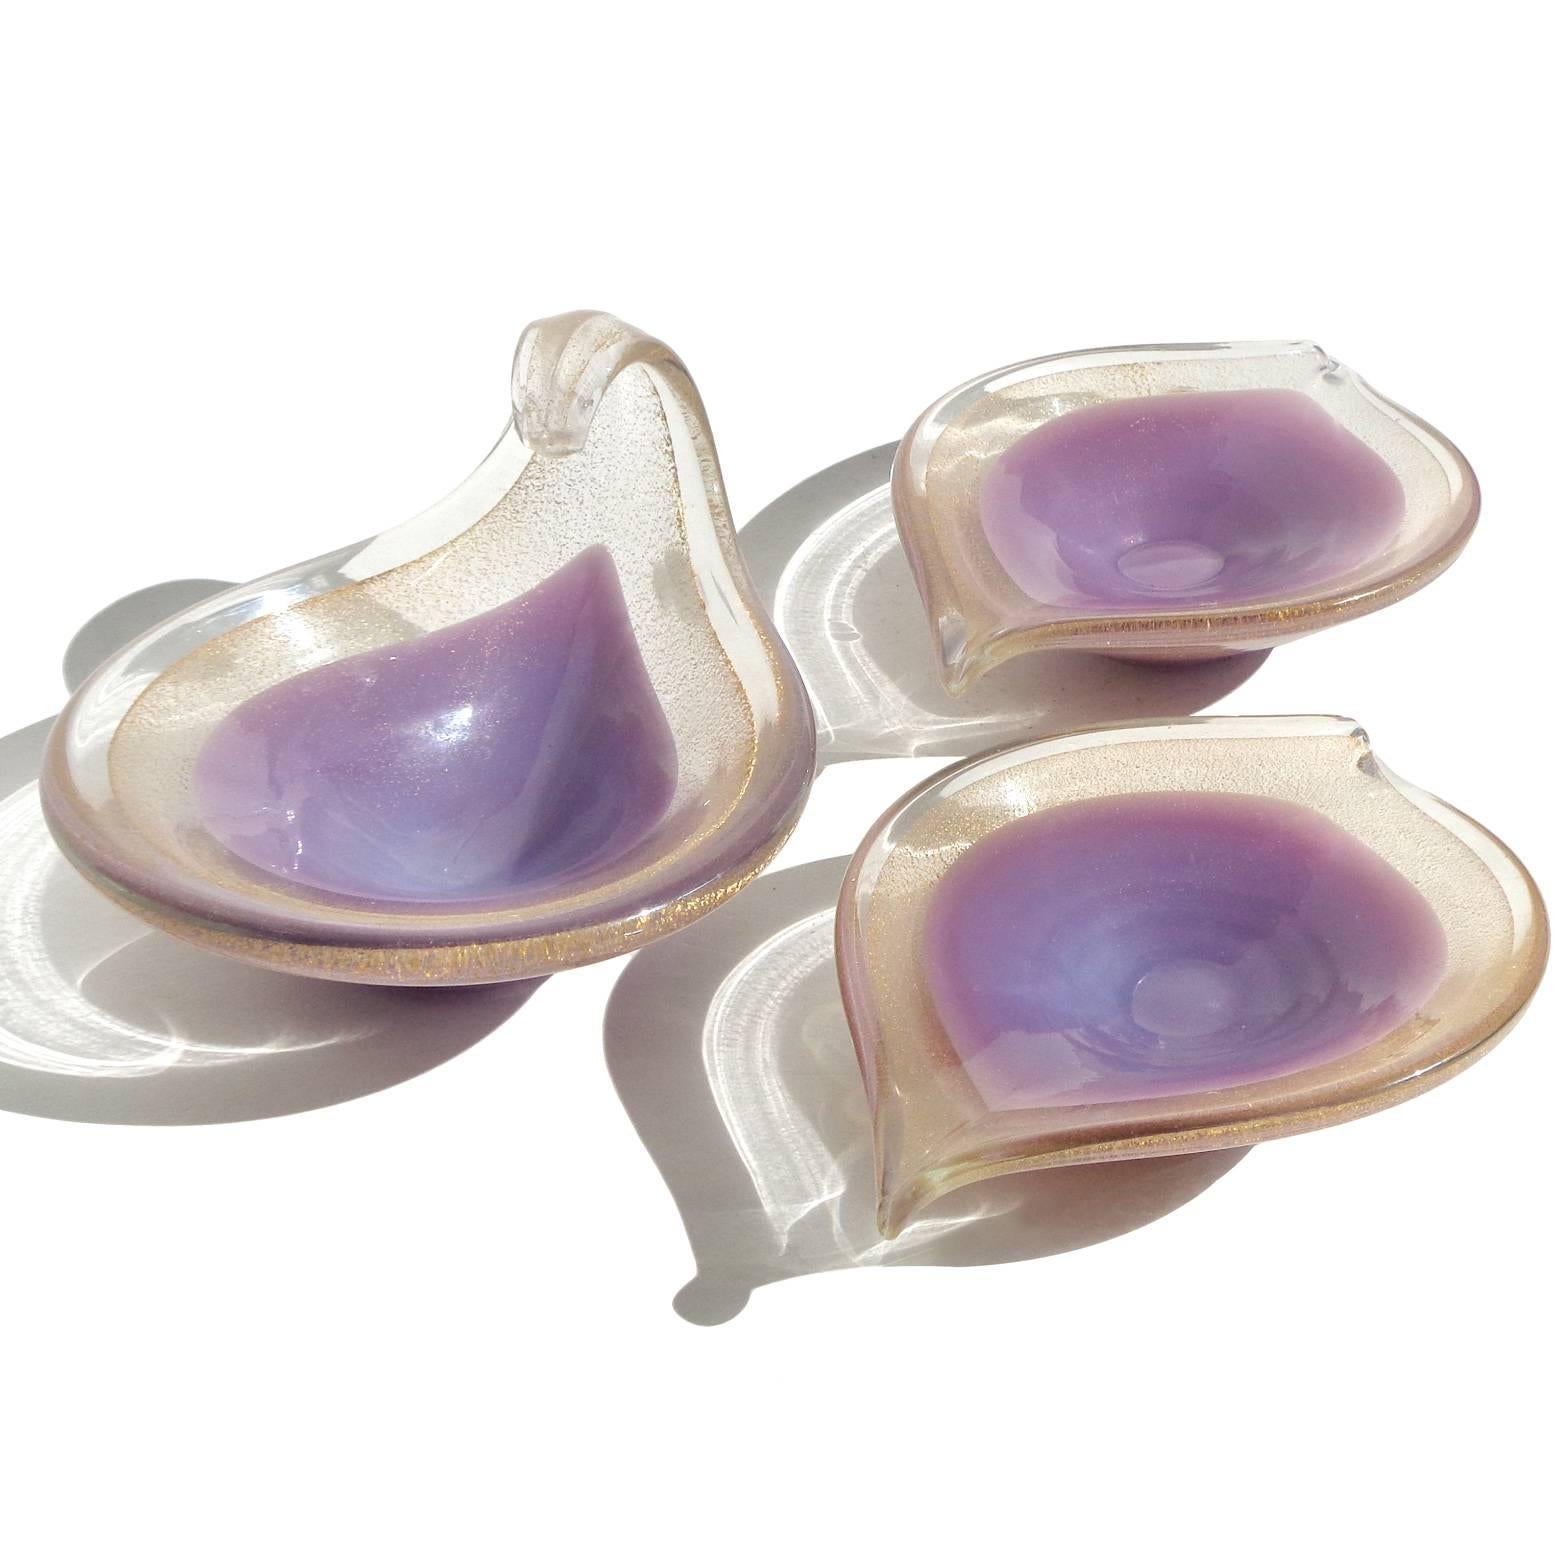 Free shipping worldwide! See details below description.

Beautiful set of Murano handblown gold flecks over purple / lavender art glass ring or trinket bowls / dishes. Documented to the Salviati Company, circa 1950s. Simple and elegant shapes.